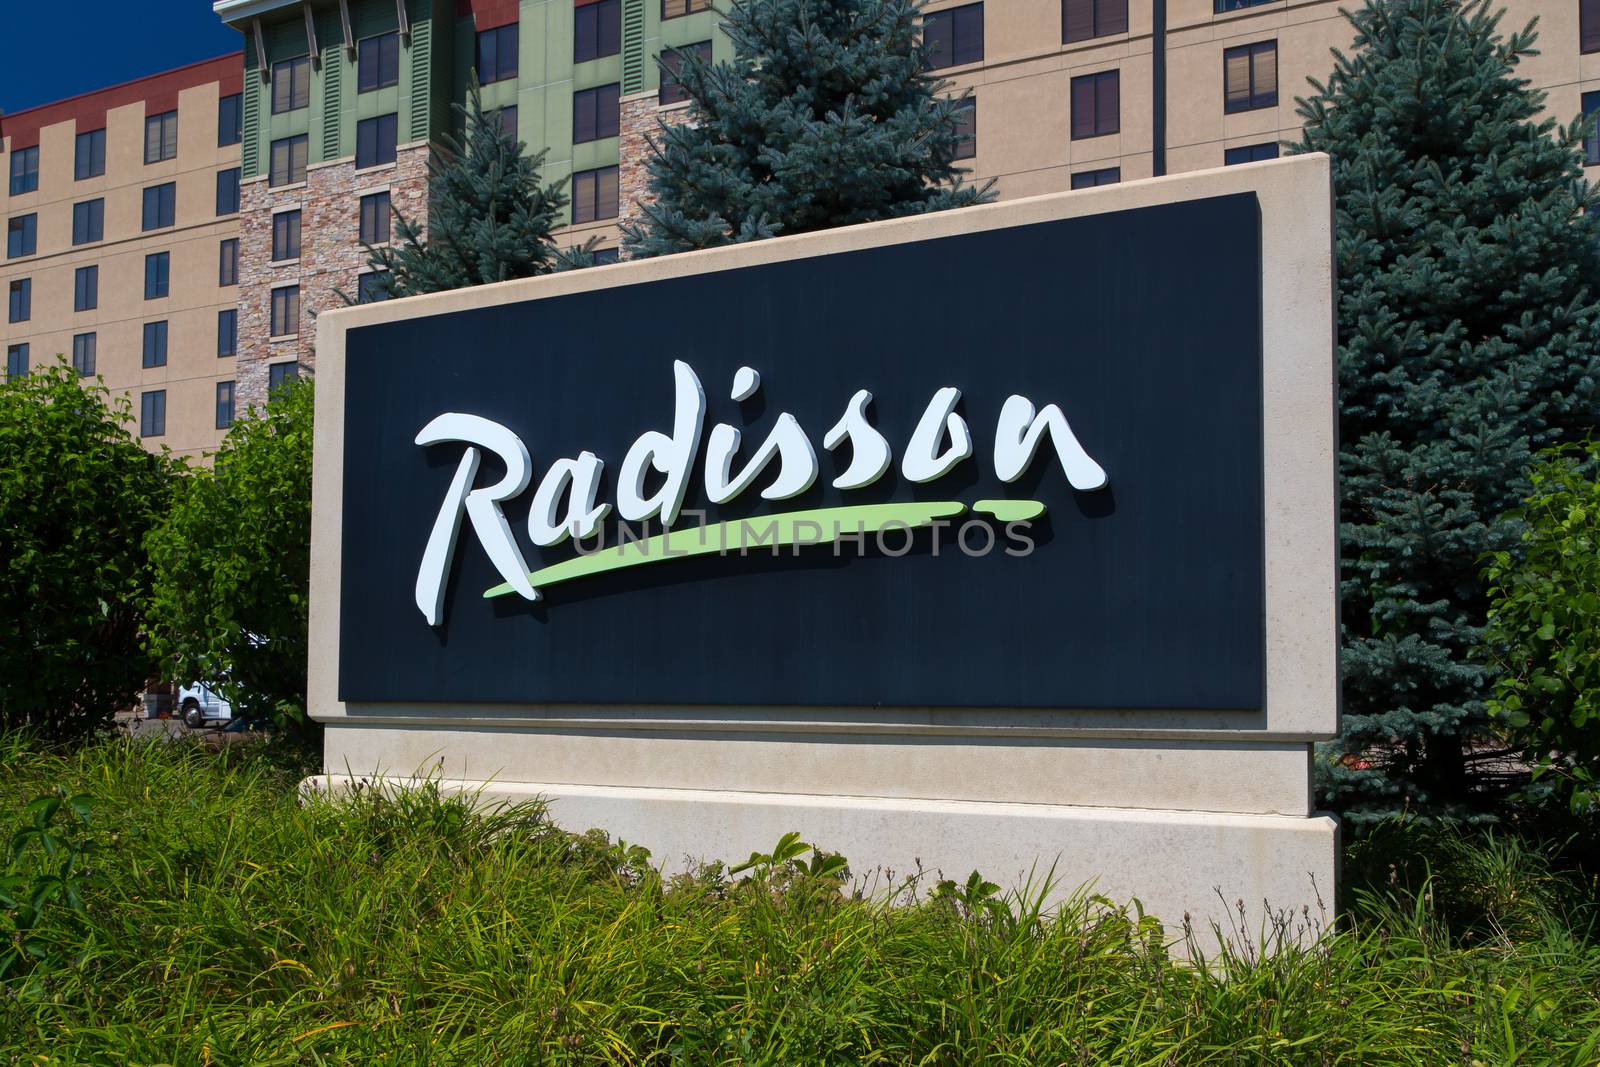 Radisson Hotel and Sign by wolterk